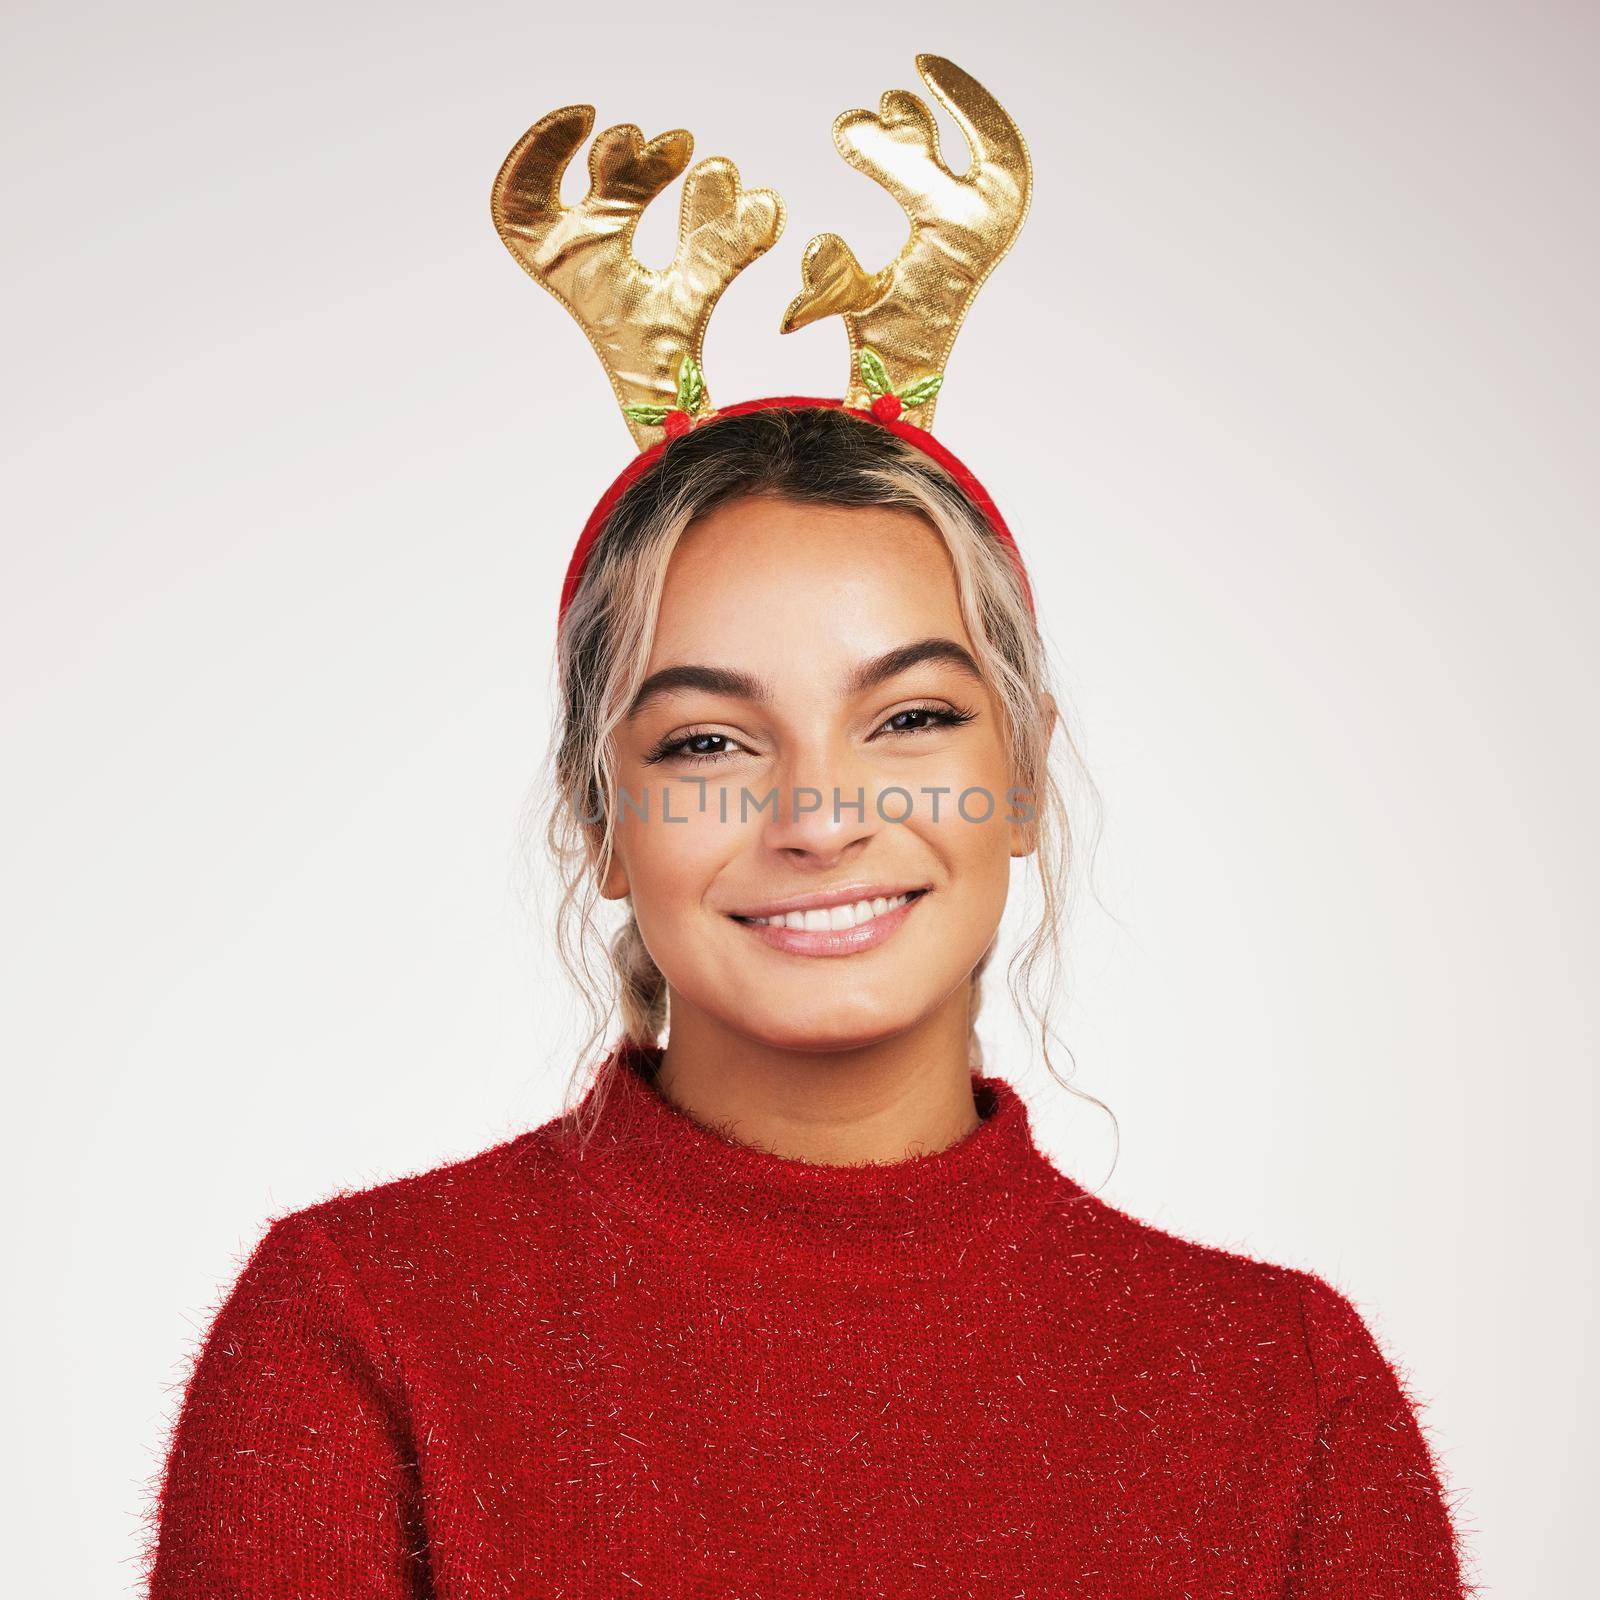 Studio shot of a young woman wearing a reindeer headwear against a grey background.